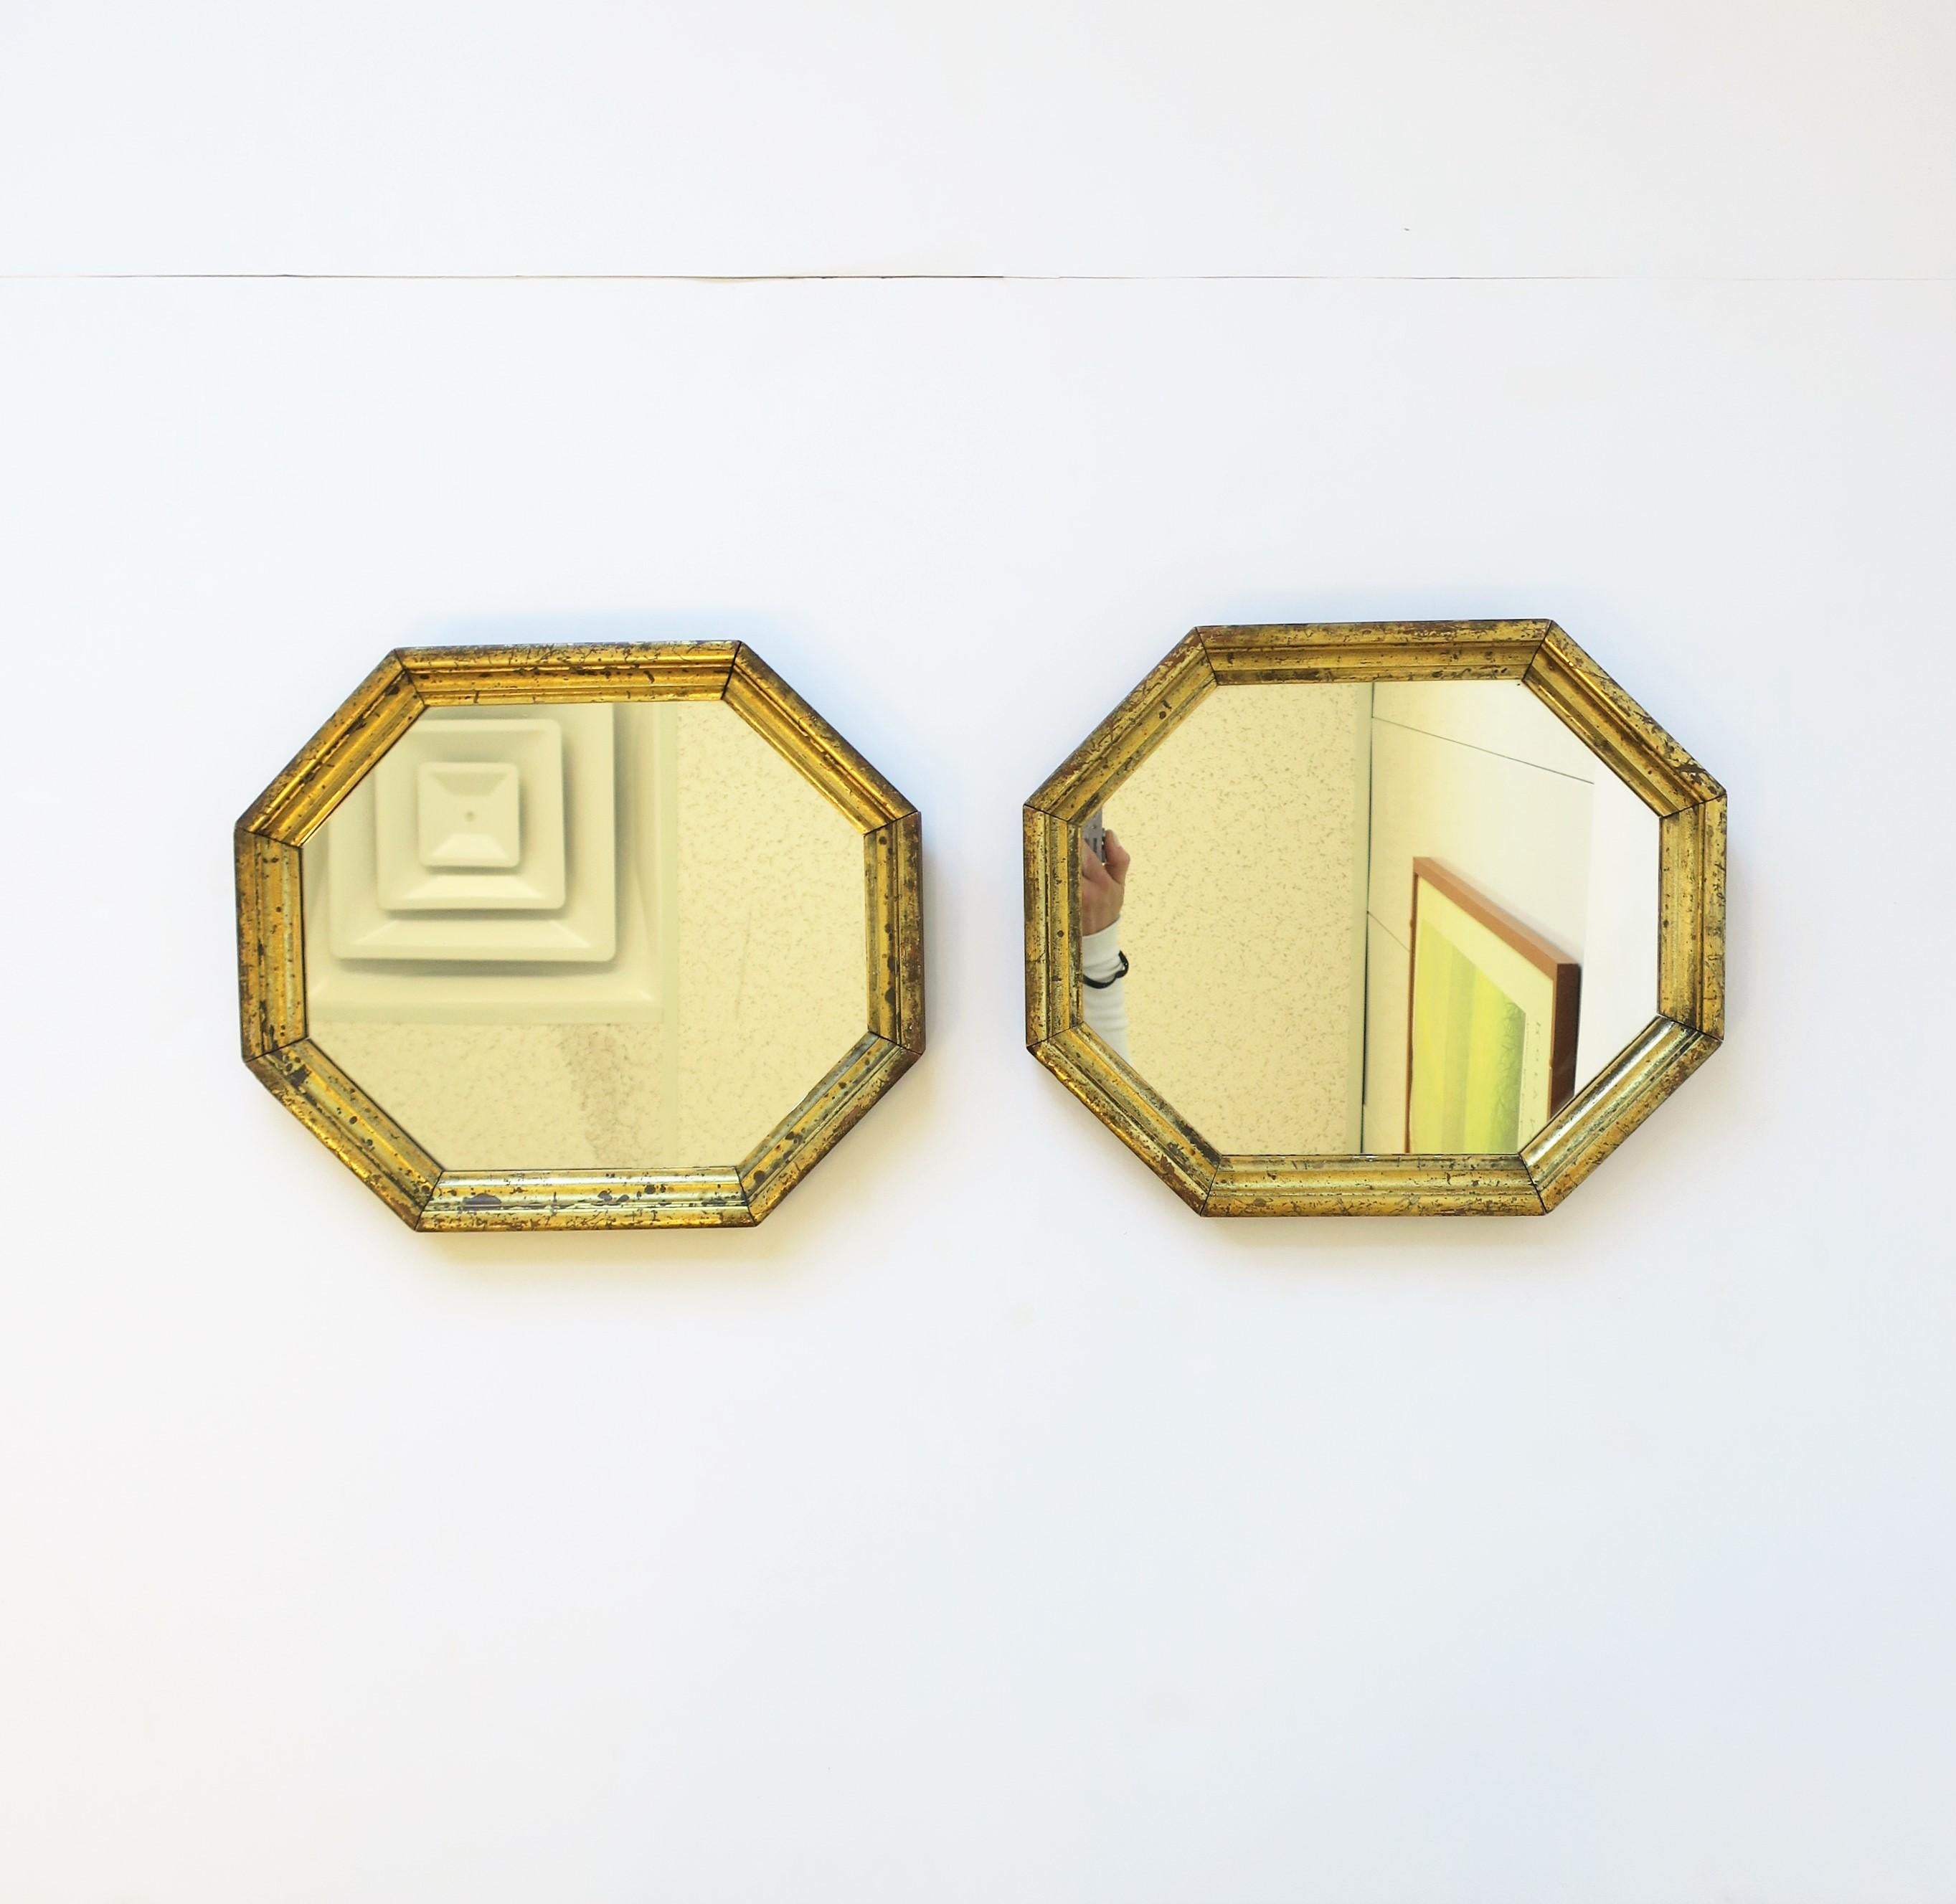 A beautiful pair of octagonal gold giltwood mirrors, circa early 20th century. A hand-crafted pair of mirrors with gold gilt applied to octagonal wood frames. Mirrors can hang horizontally or vertically. As shown on back, mirrors are prepared to